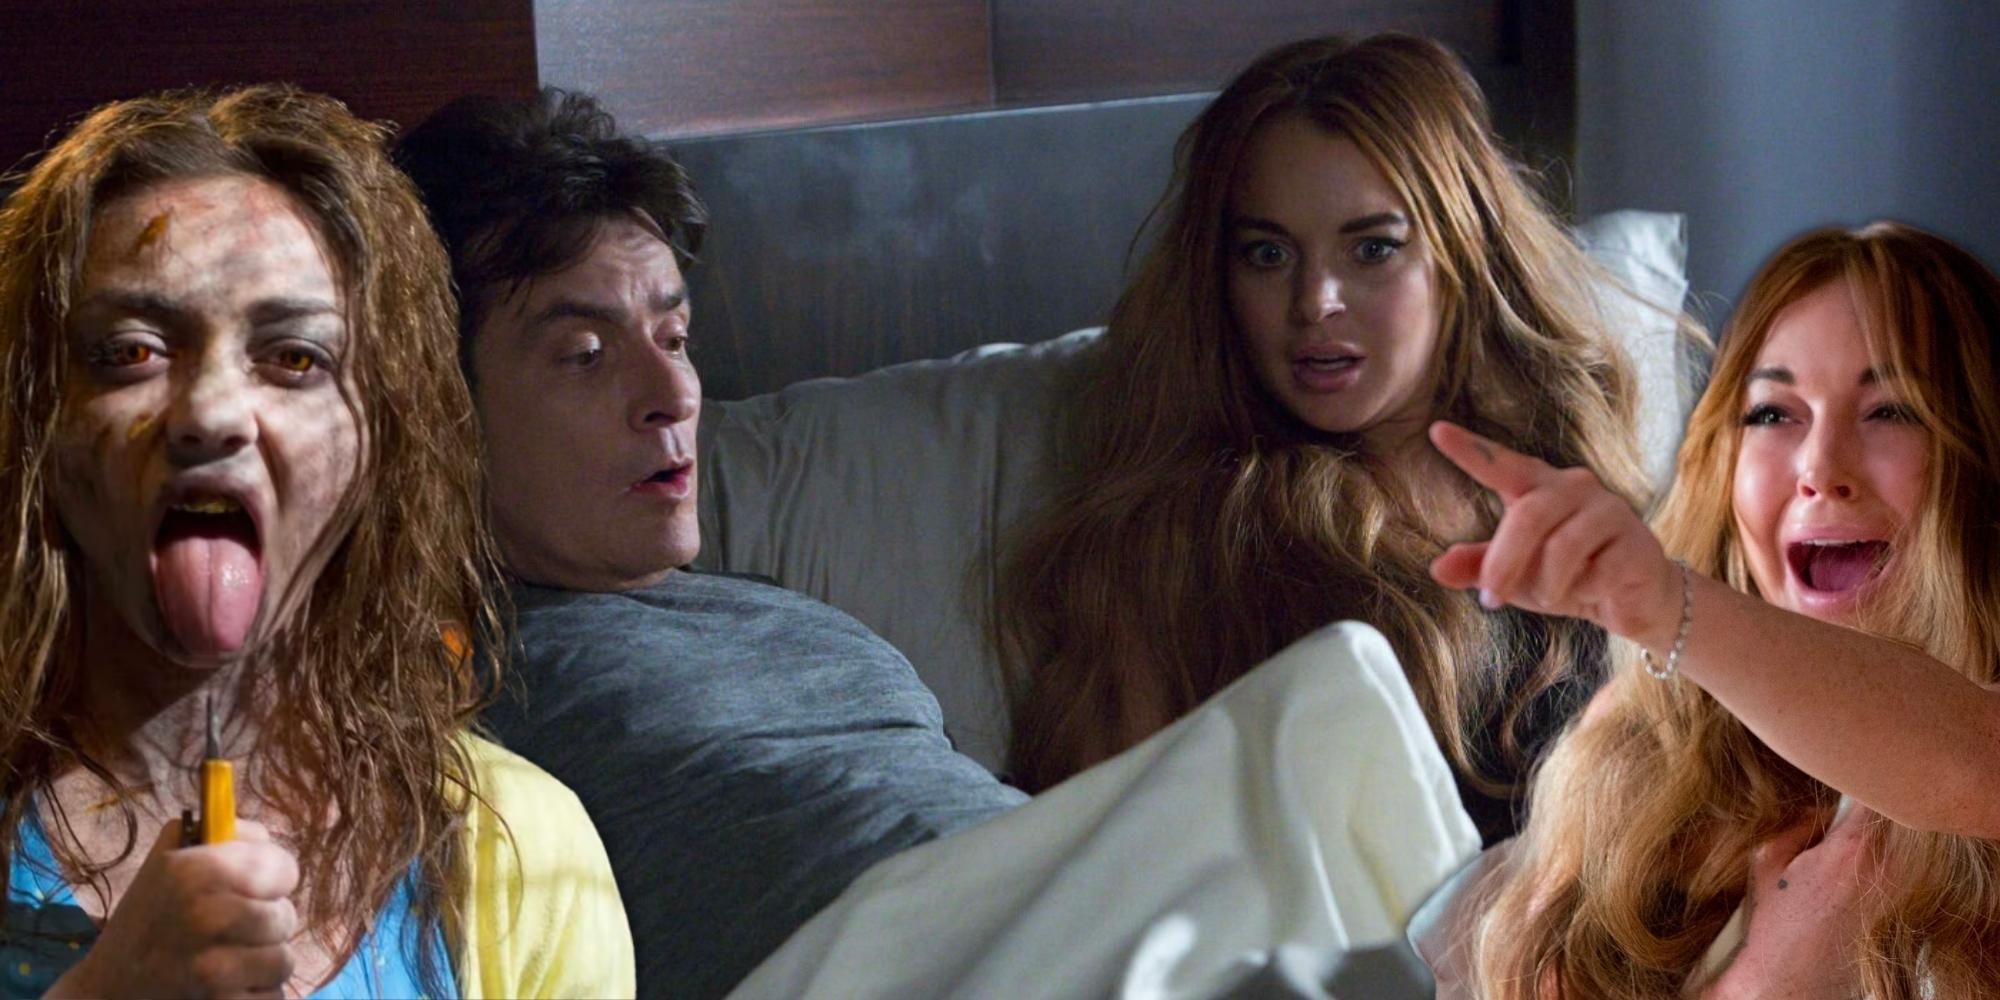 Sarah Hyland dressed as Regan from the Exorcist, Charlie Sheen and Lindsay Lohan in bed together, Lindsay screaming in Scary Movie 5